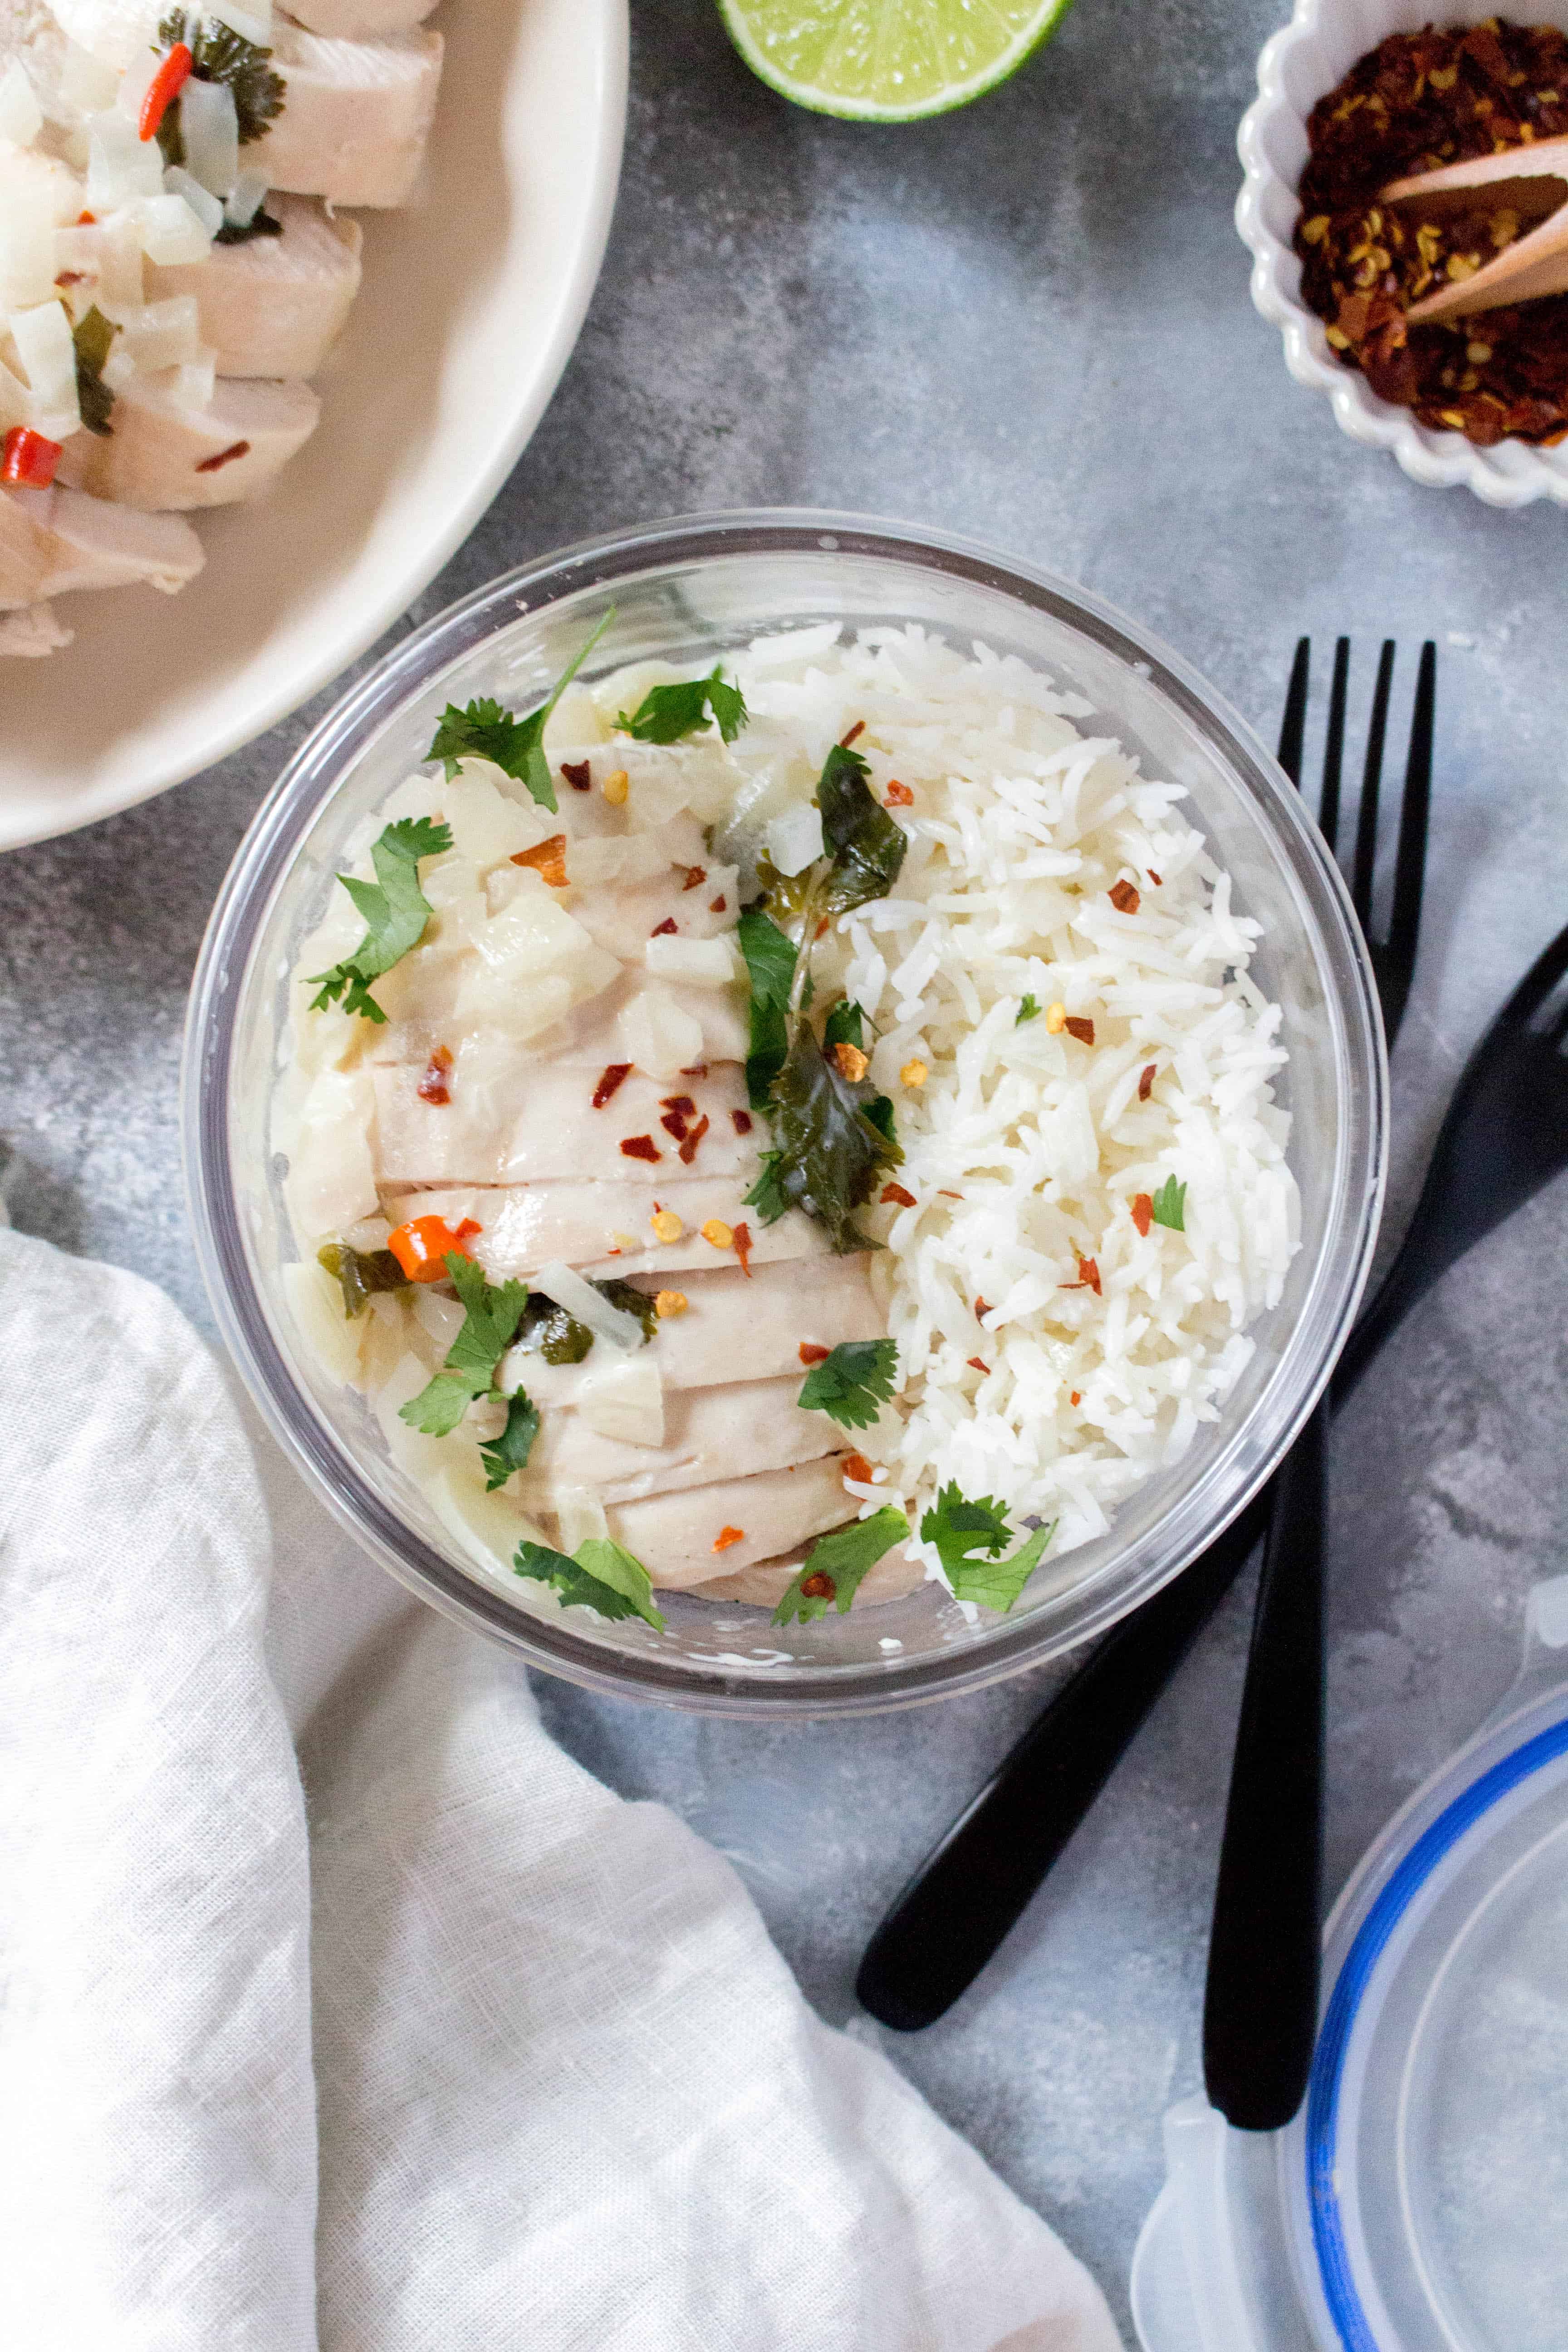 This Thai Inspired Chili Lime Coconut Chicken is a creamy, refreshing, and packed with flavour recipe that is perfect as a meal prep or a quick weeknight dinner.